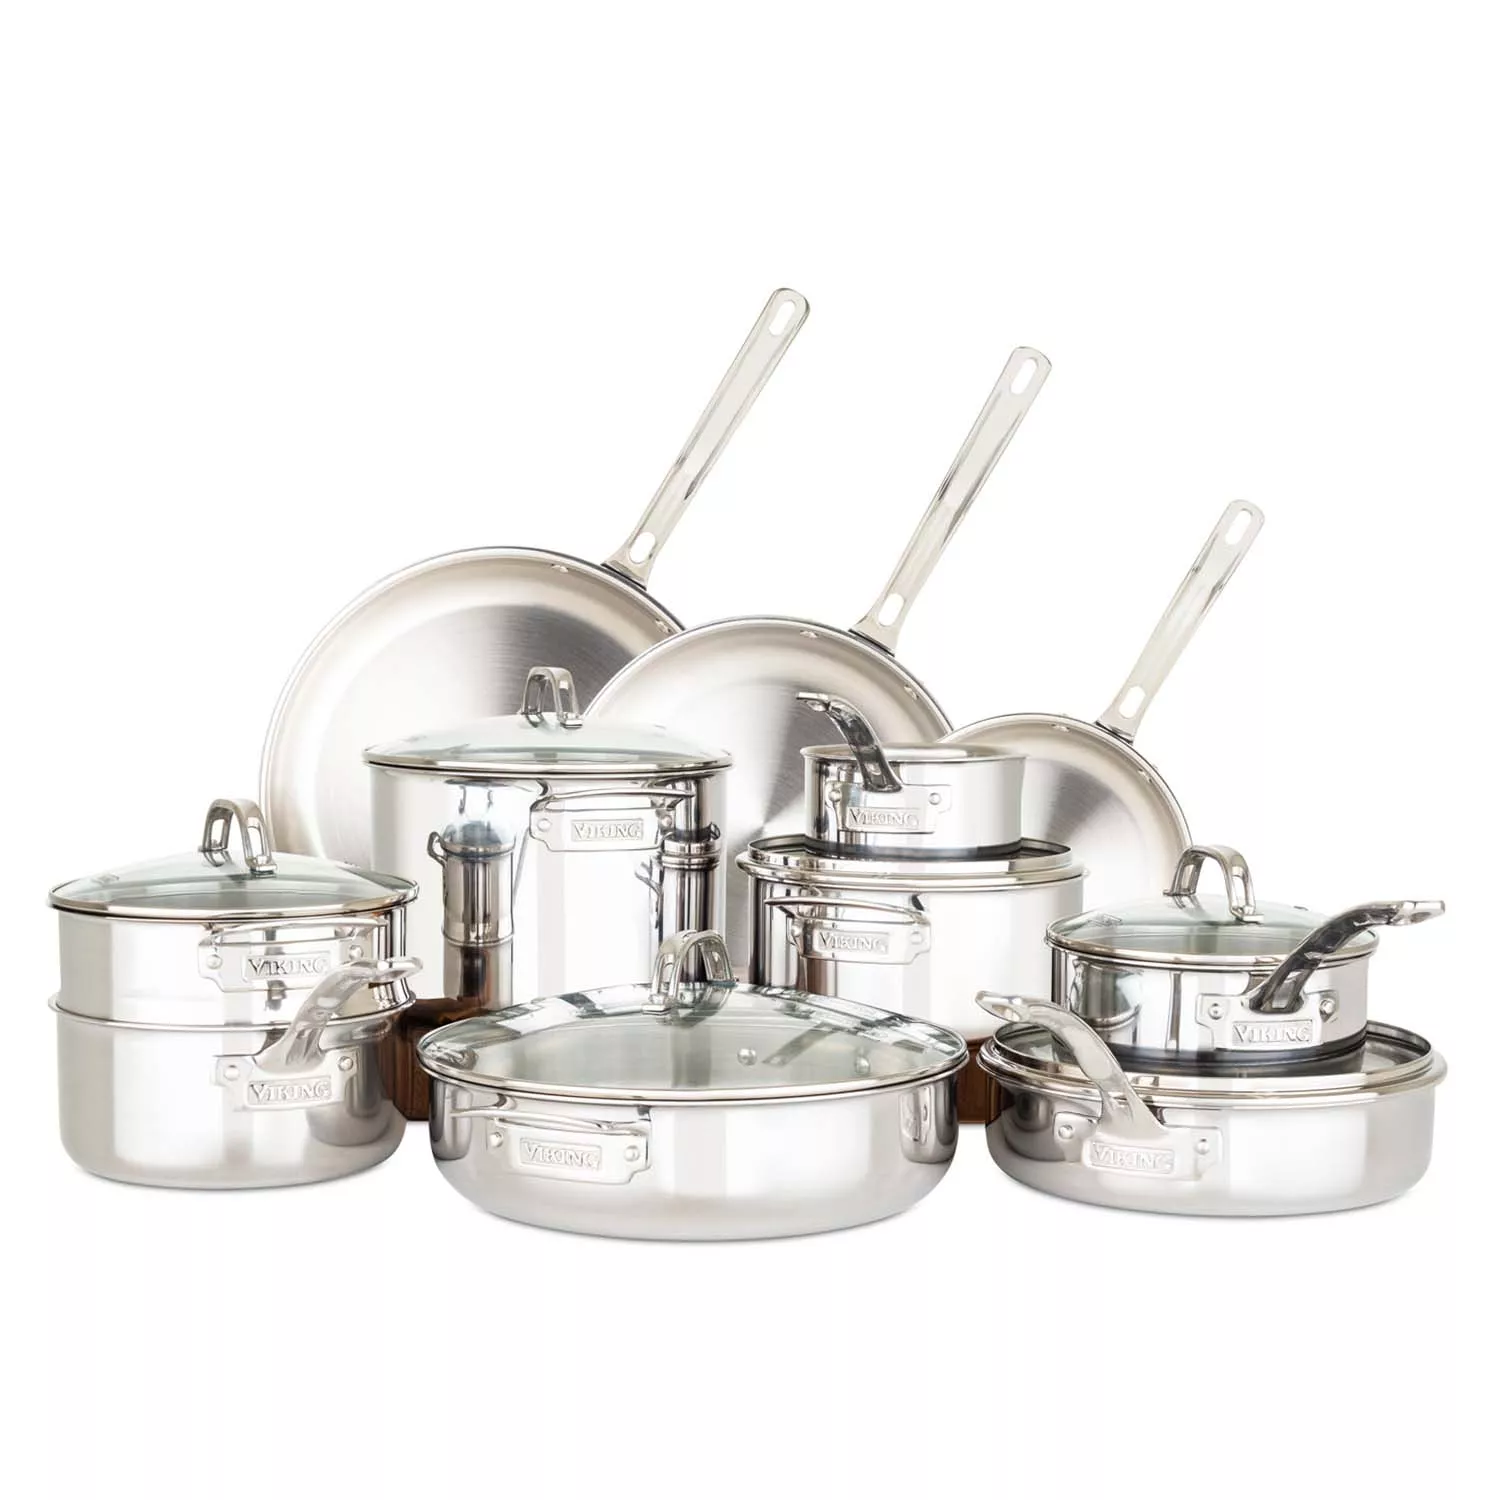 Tri-Ply Stainless Steel 6-Piece Cookware Set